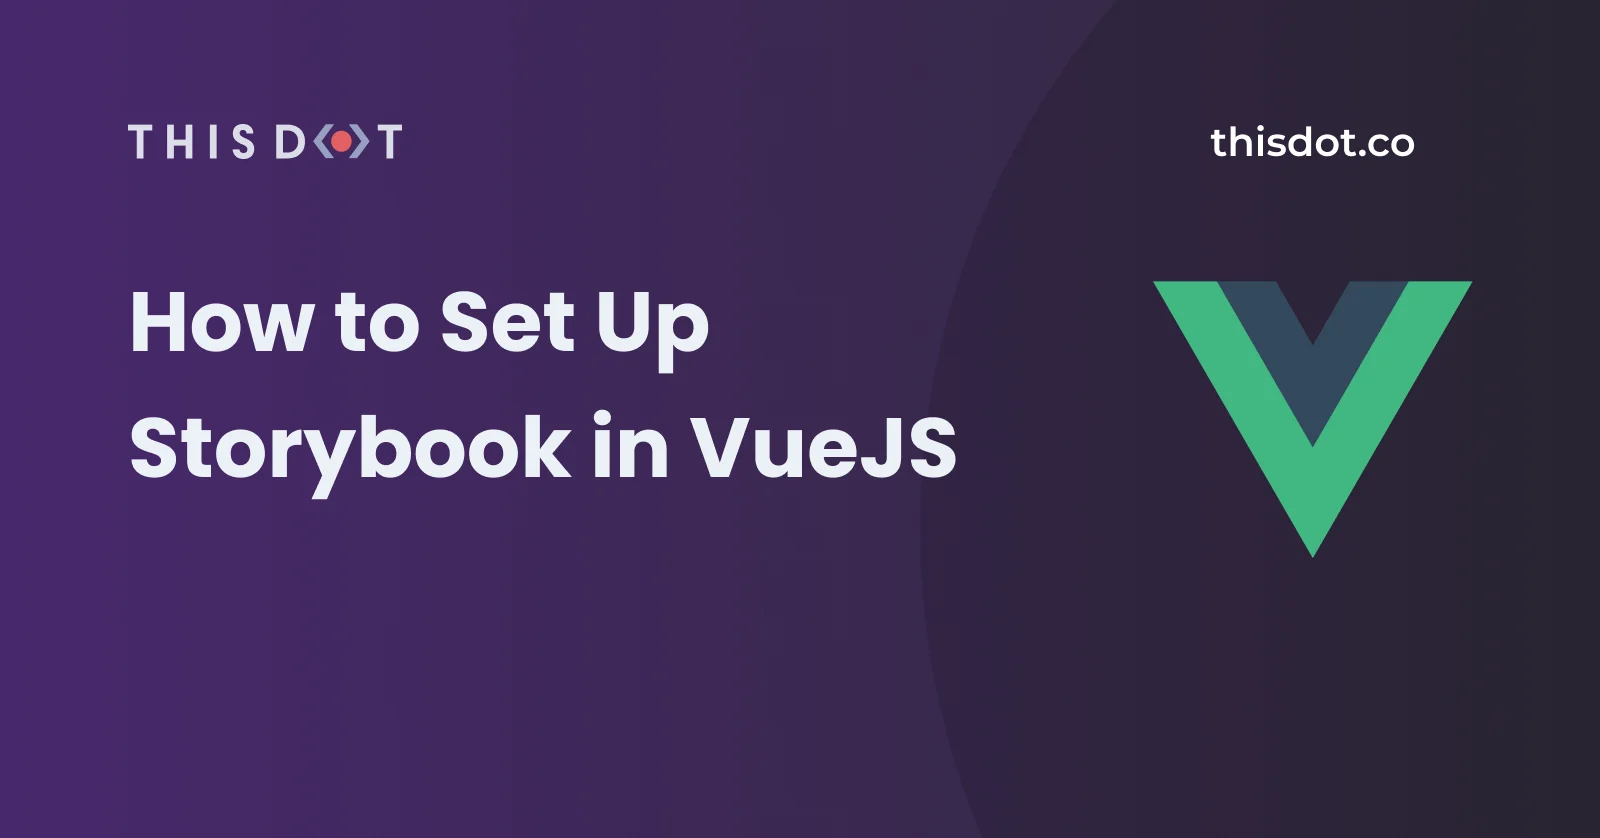 How to Set Up Storybook in VueJS